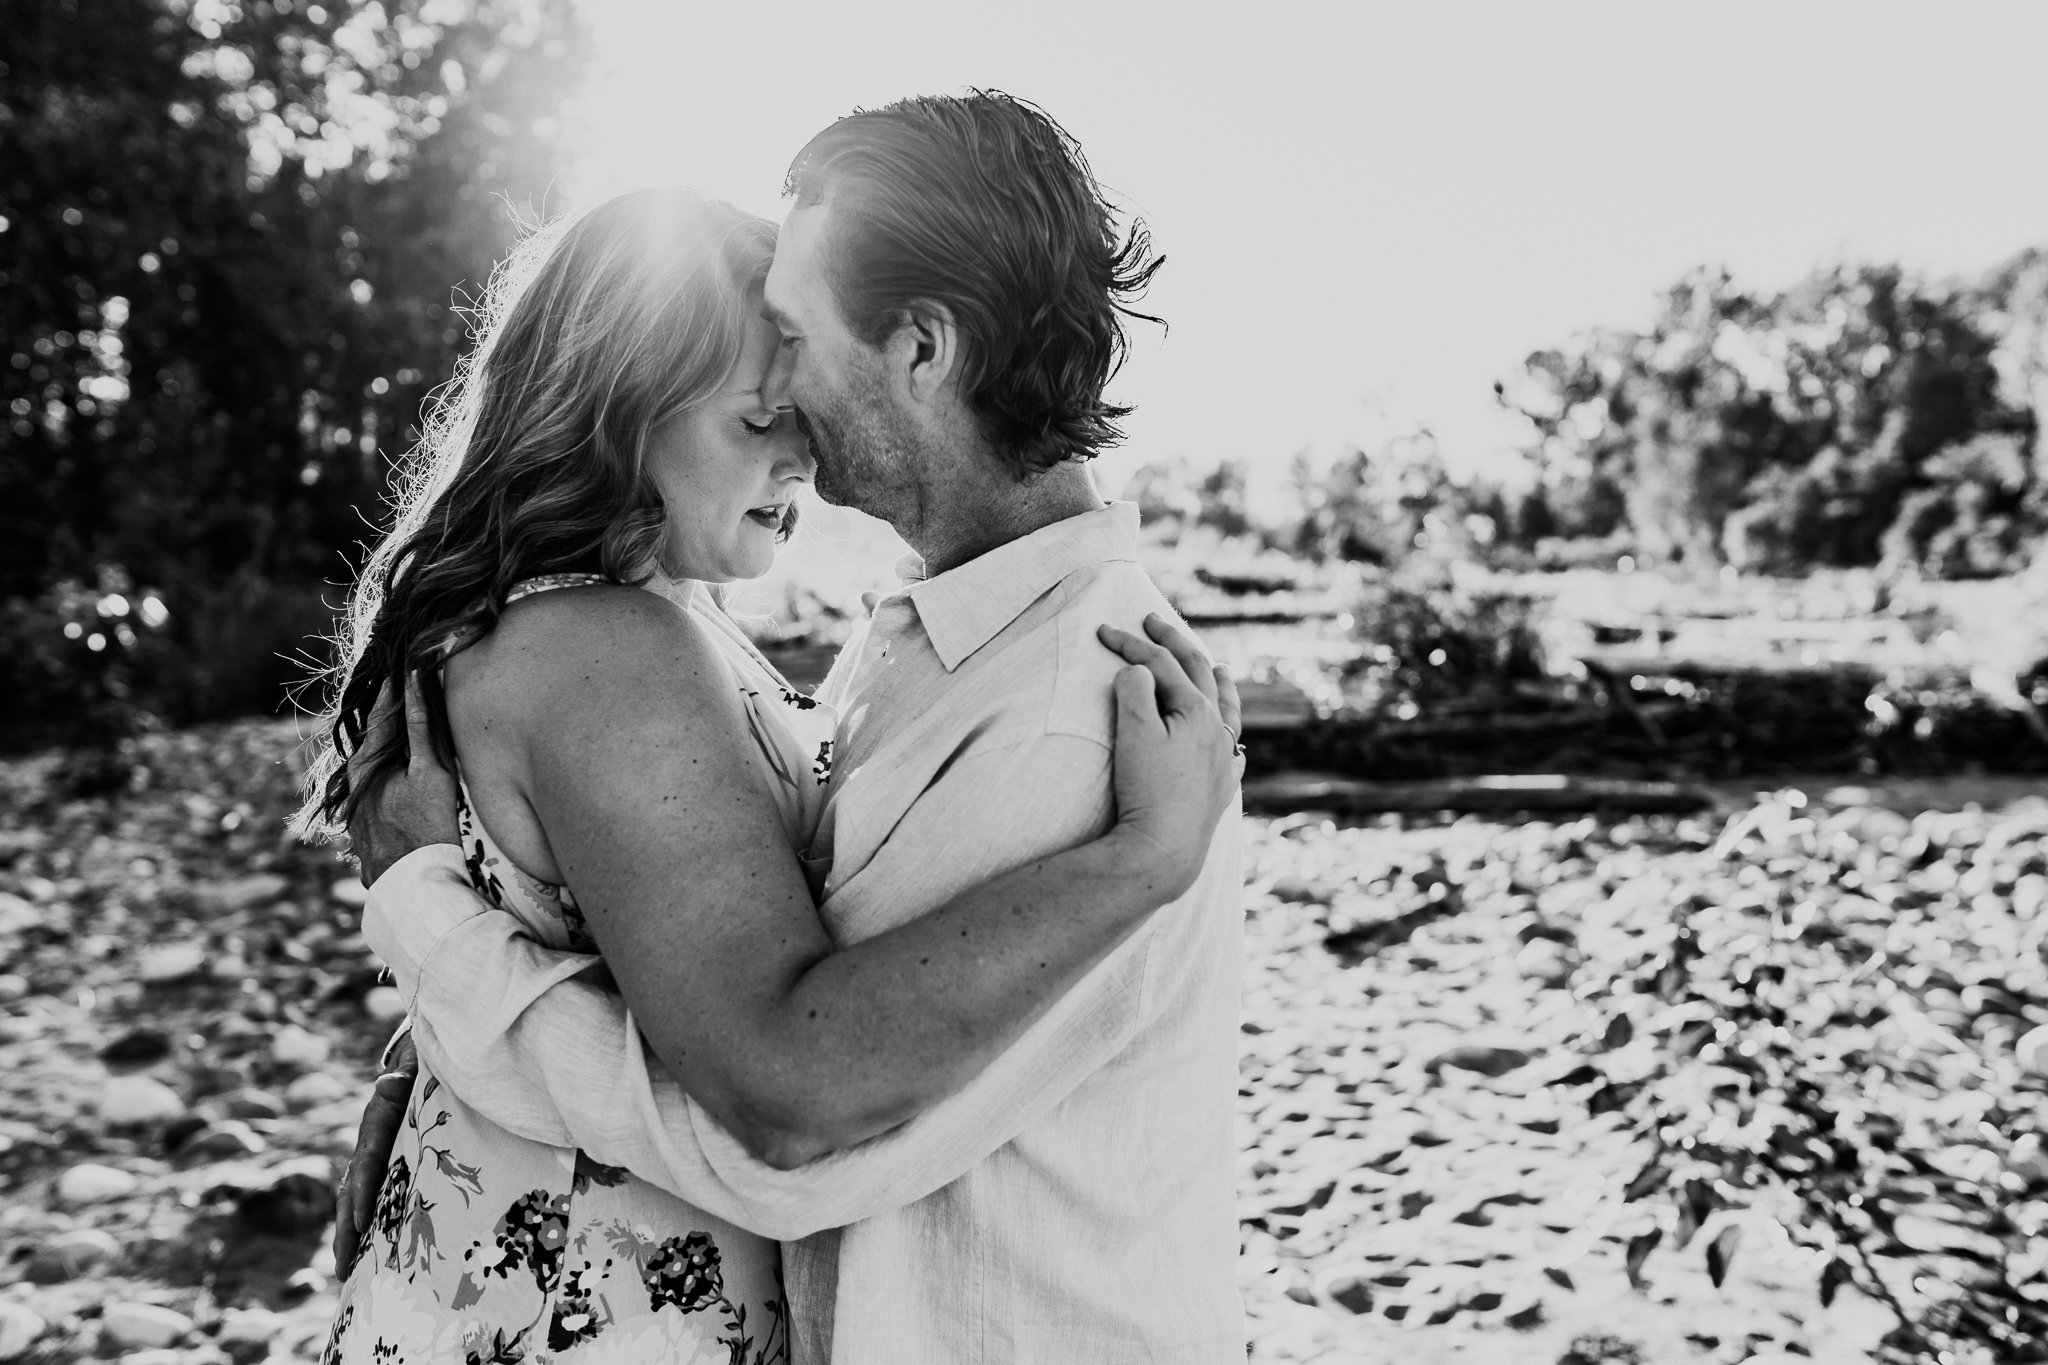 Vedder+River+Family+Session+-+Anna+Hurley+Photography++(10).jpg